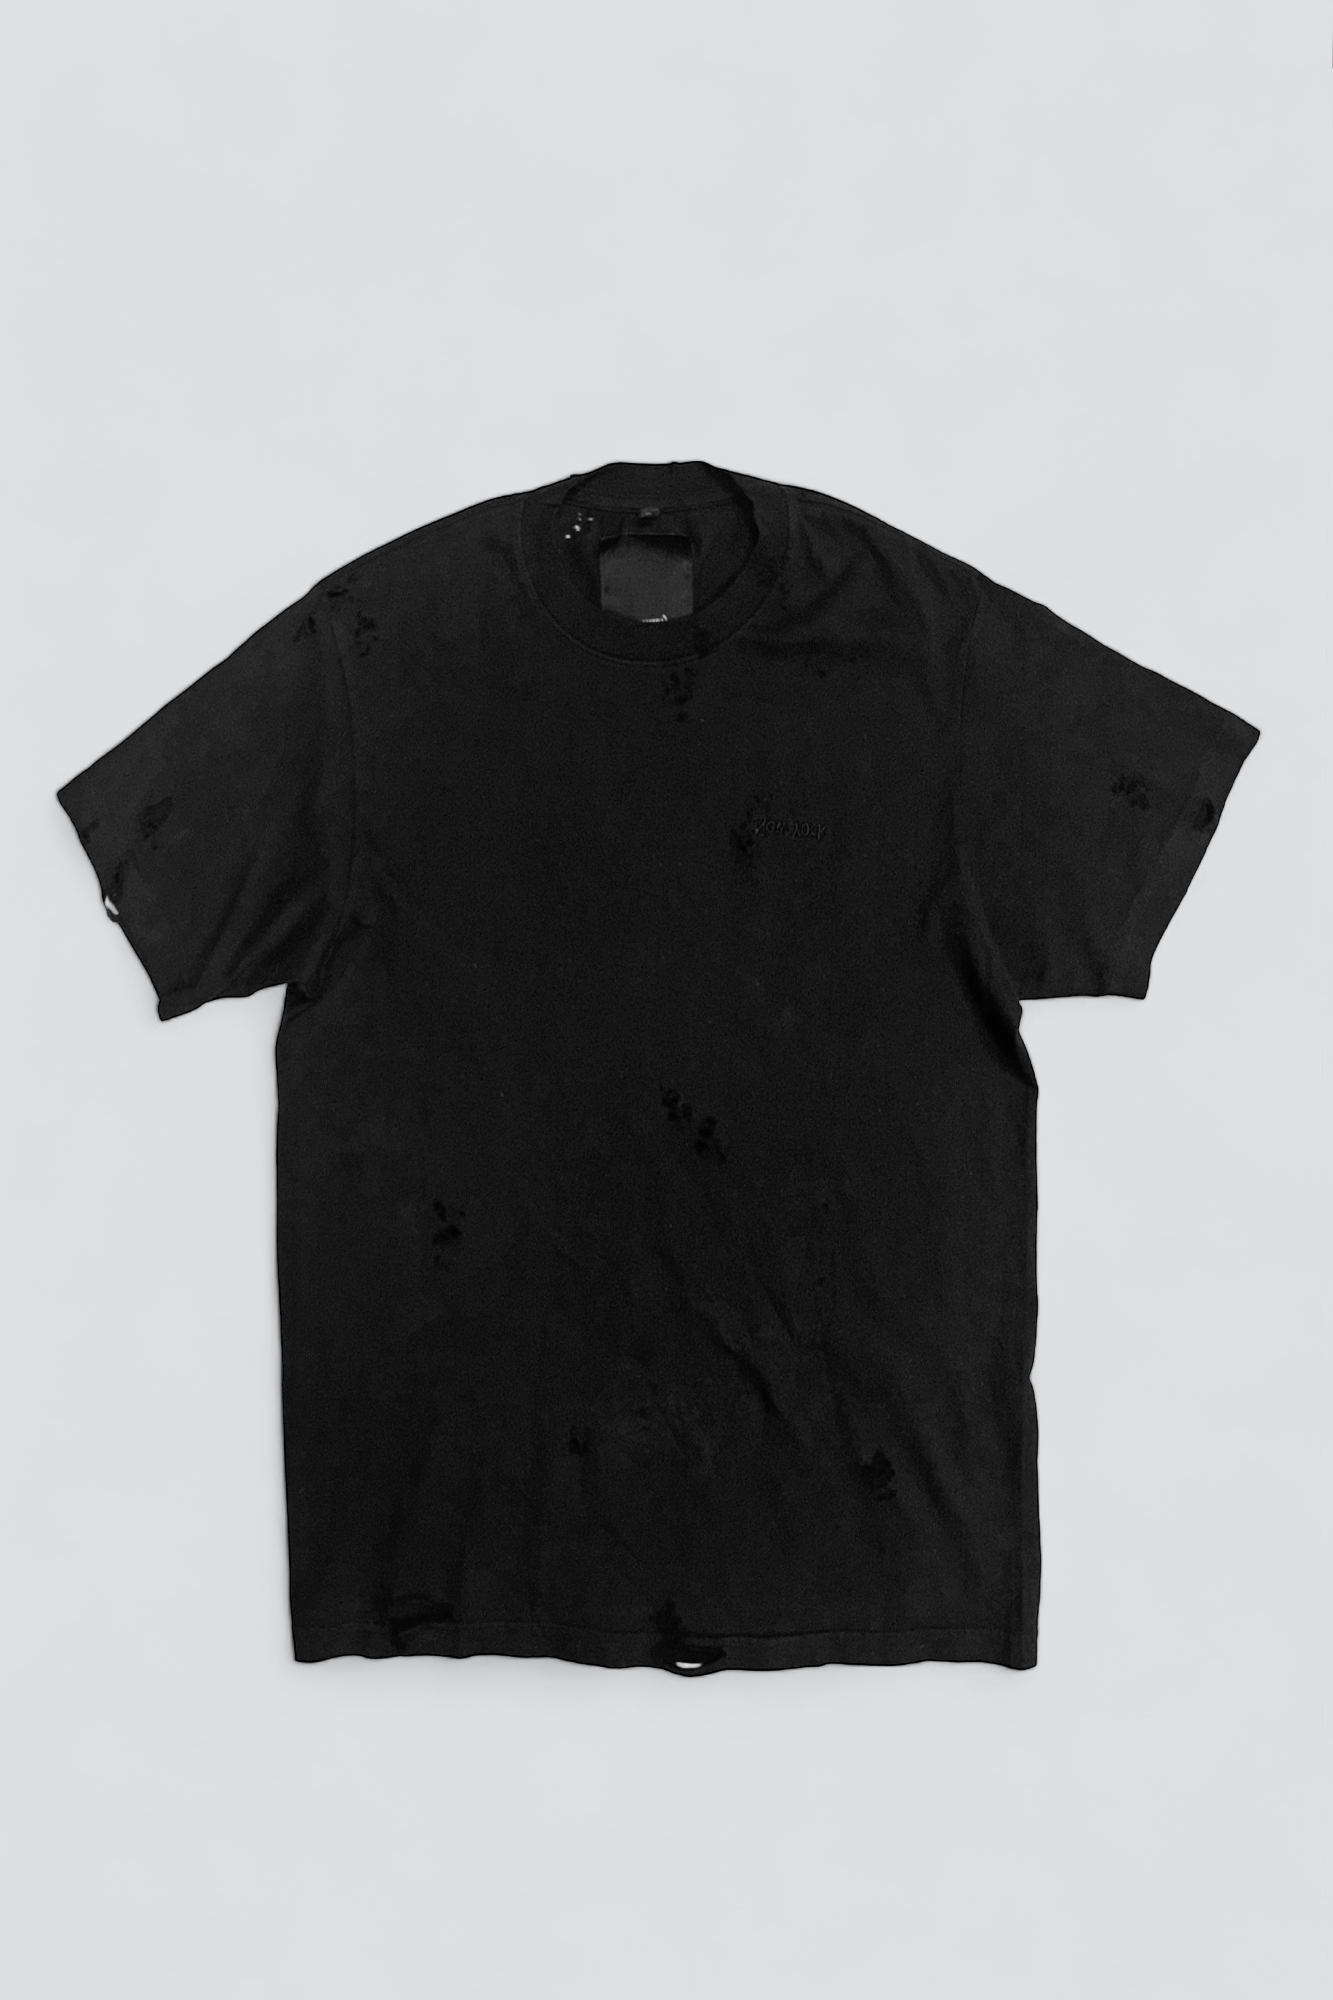 Distressed Black Embroidered New York Chest Logo T-Shirt